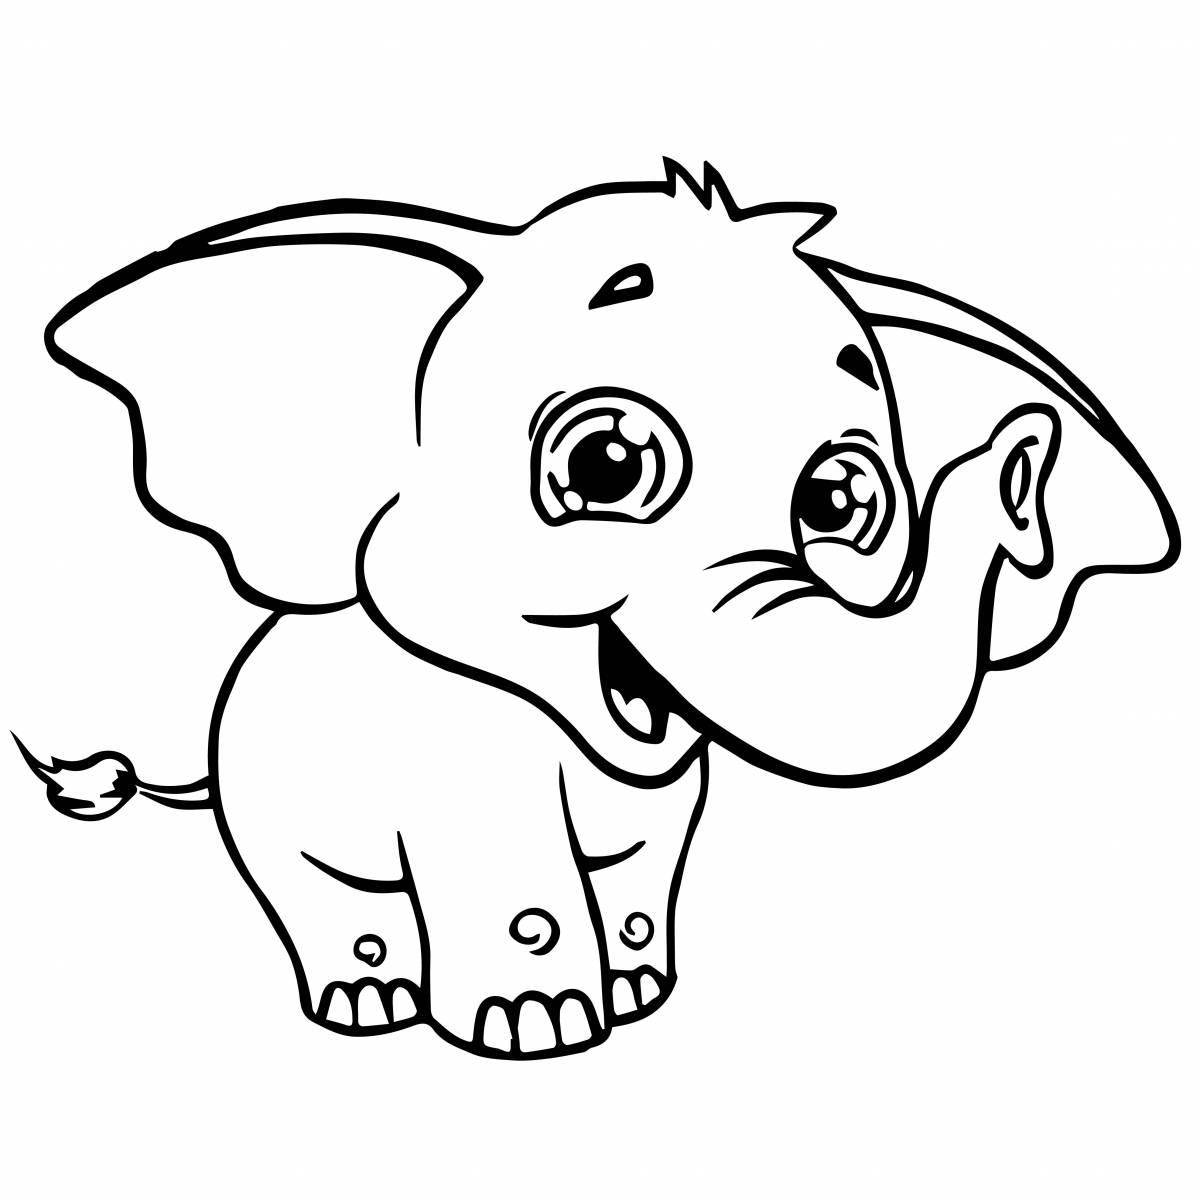 Incredible elephant coloring book for kids